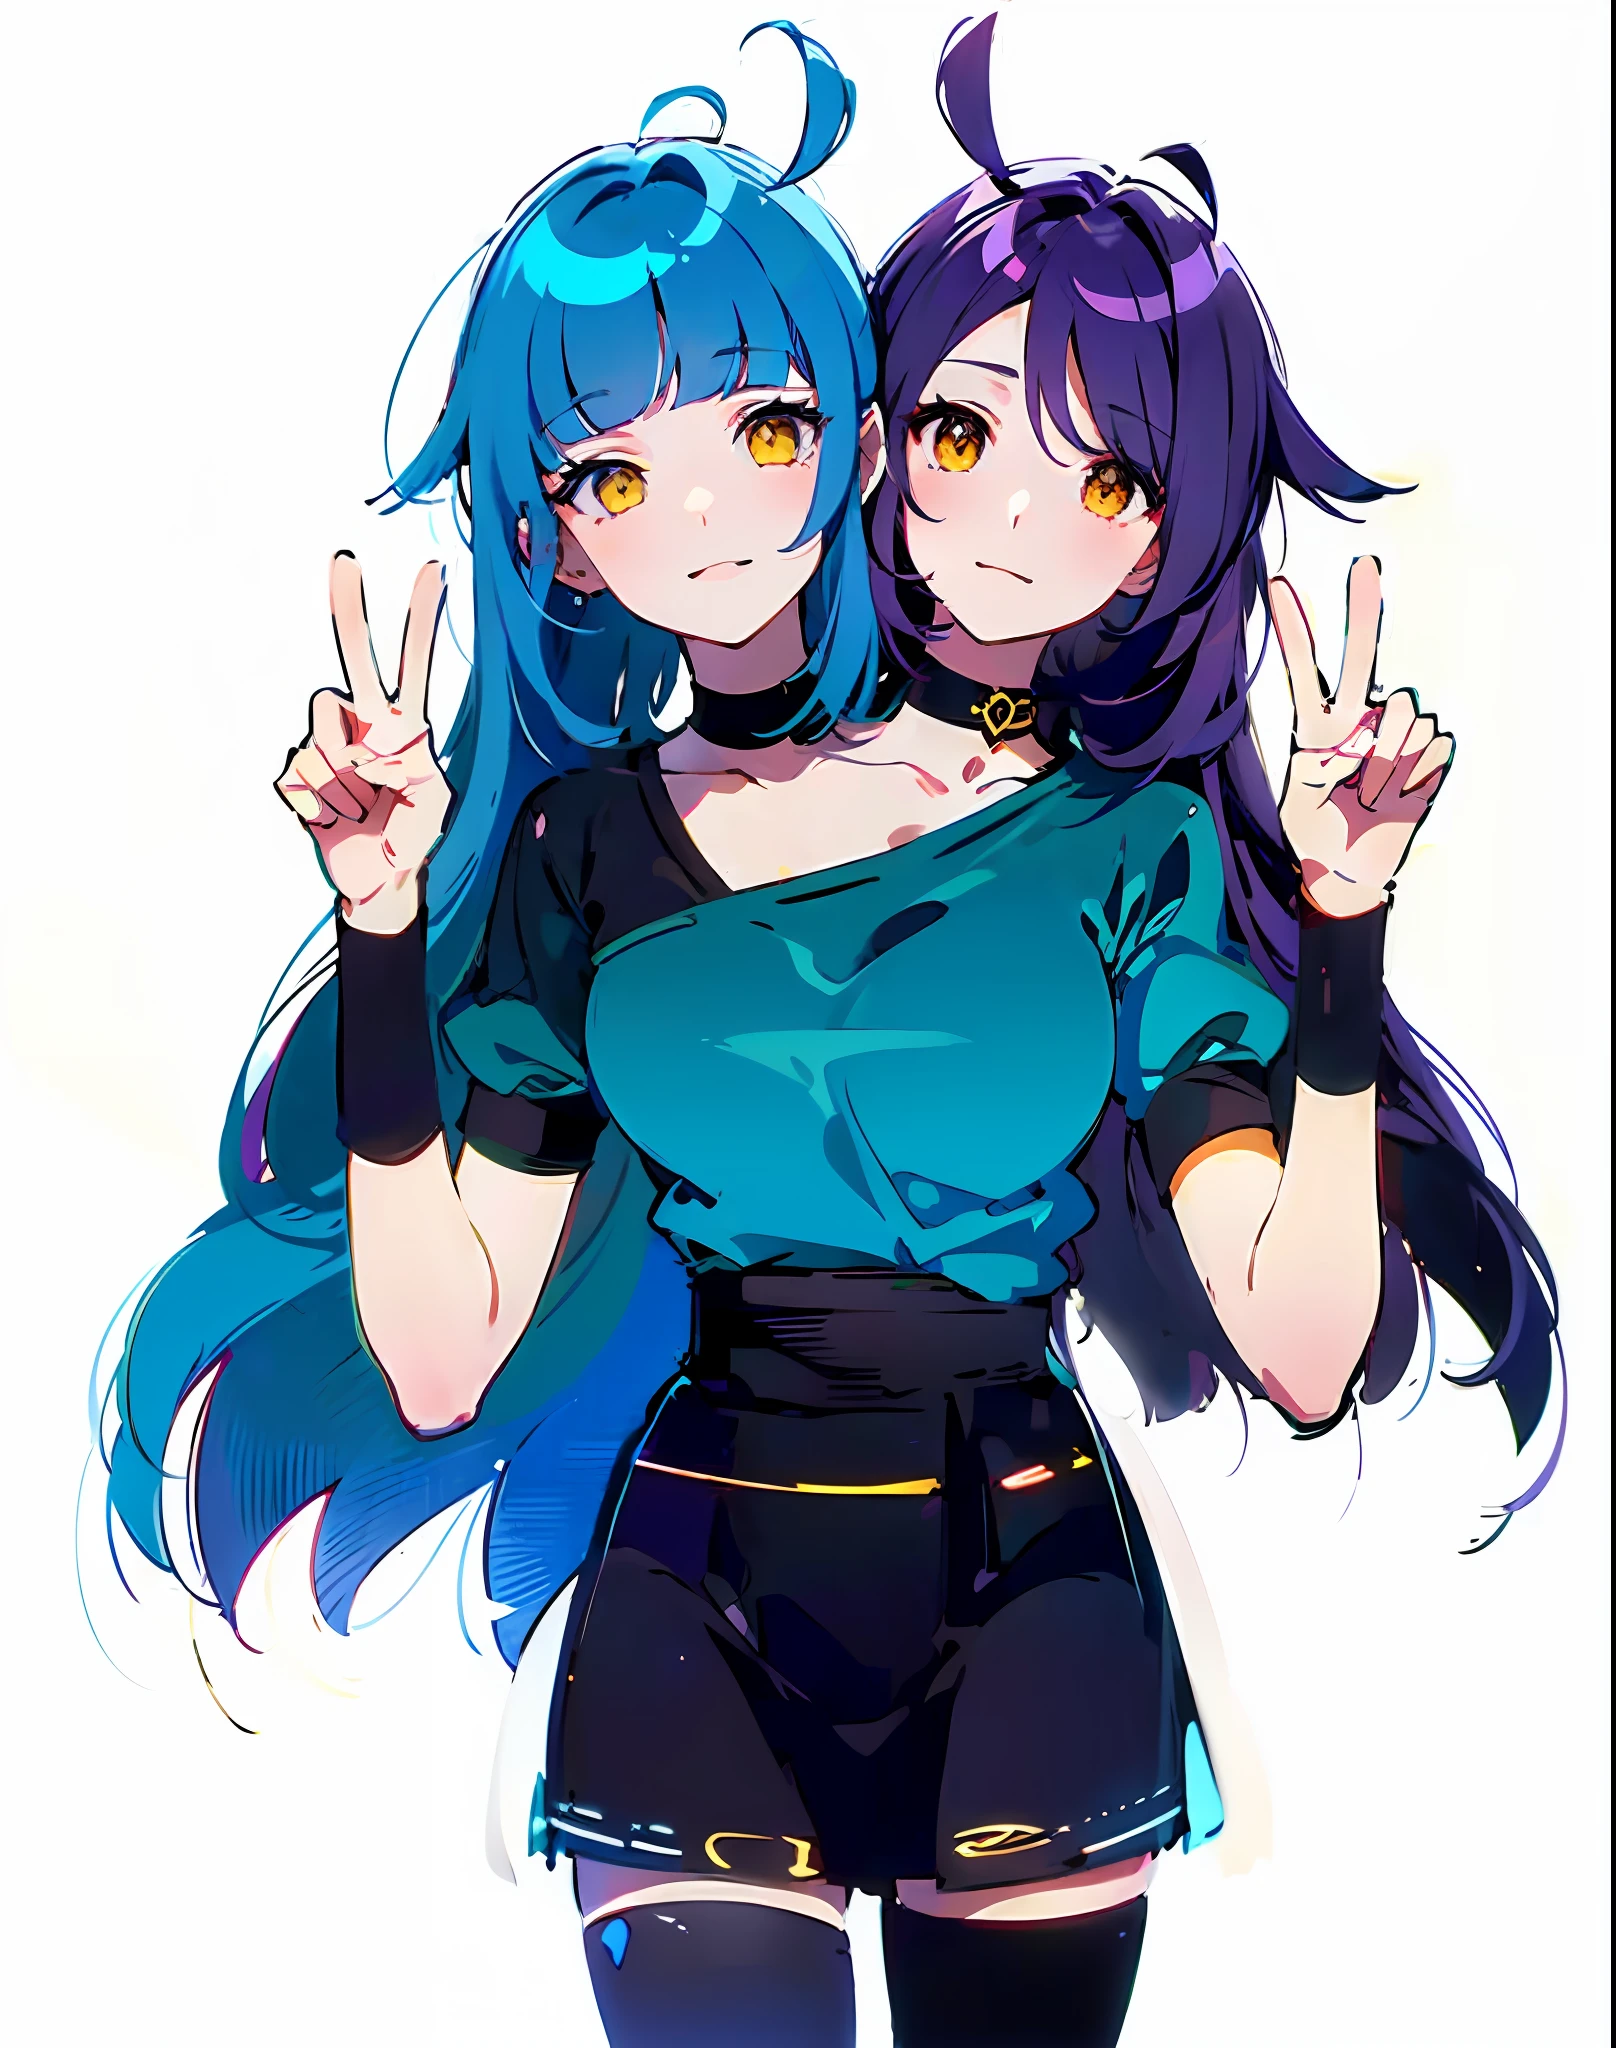 best resolution, (2heads:1.5),anime girl with two heads, blue dyed hair, purple dyed hair, different hair color, yellow eyes, ahoge, chokers, holding out peace signs, black t-shirt, blue top, black wristbands, , blue skirt, black stockings, high boots,white room background